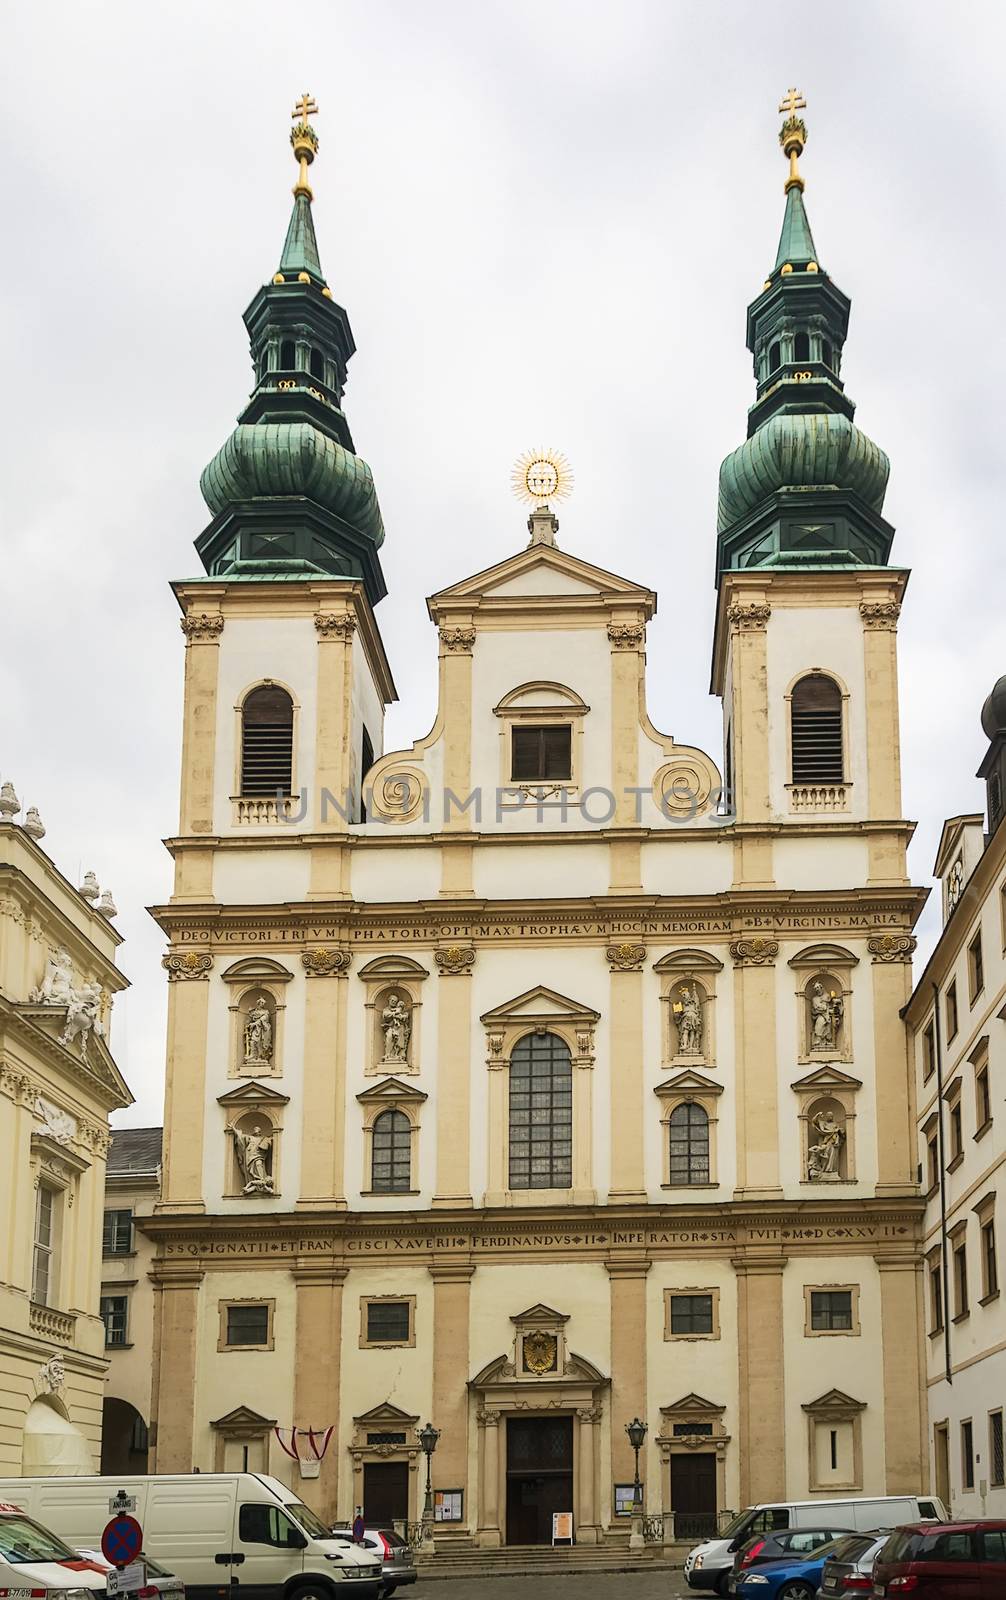 The Jesuit Church, also known as the University Church is double-tower church in Vienna, Austria. Influenced by early Baroque principles, the church was remodeled between 1703 and 1705.